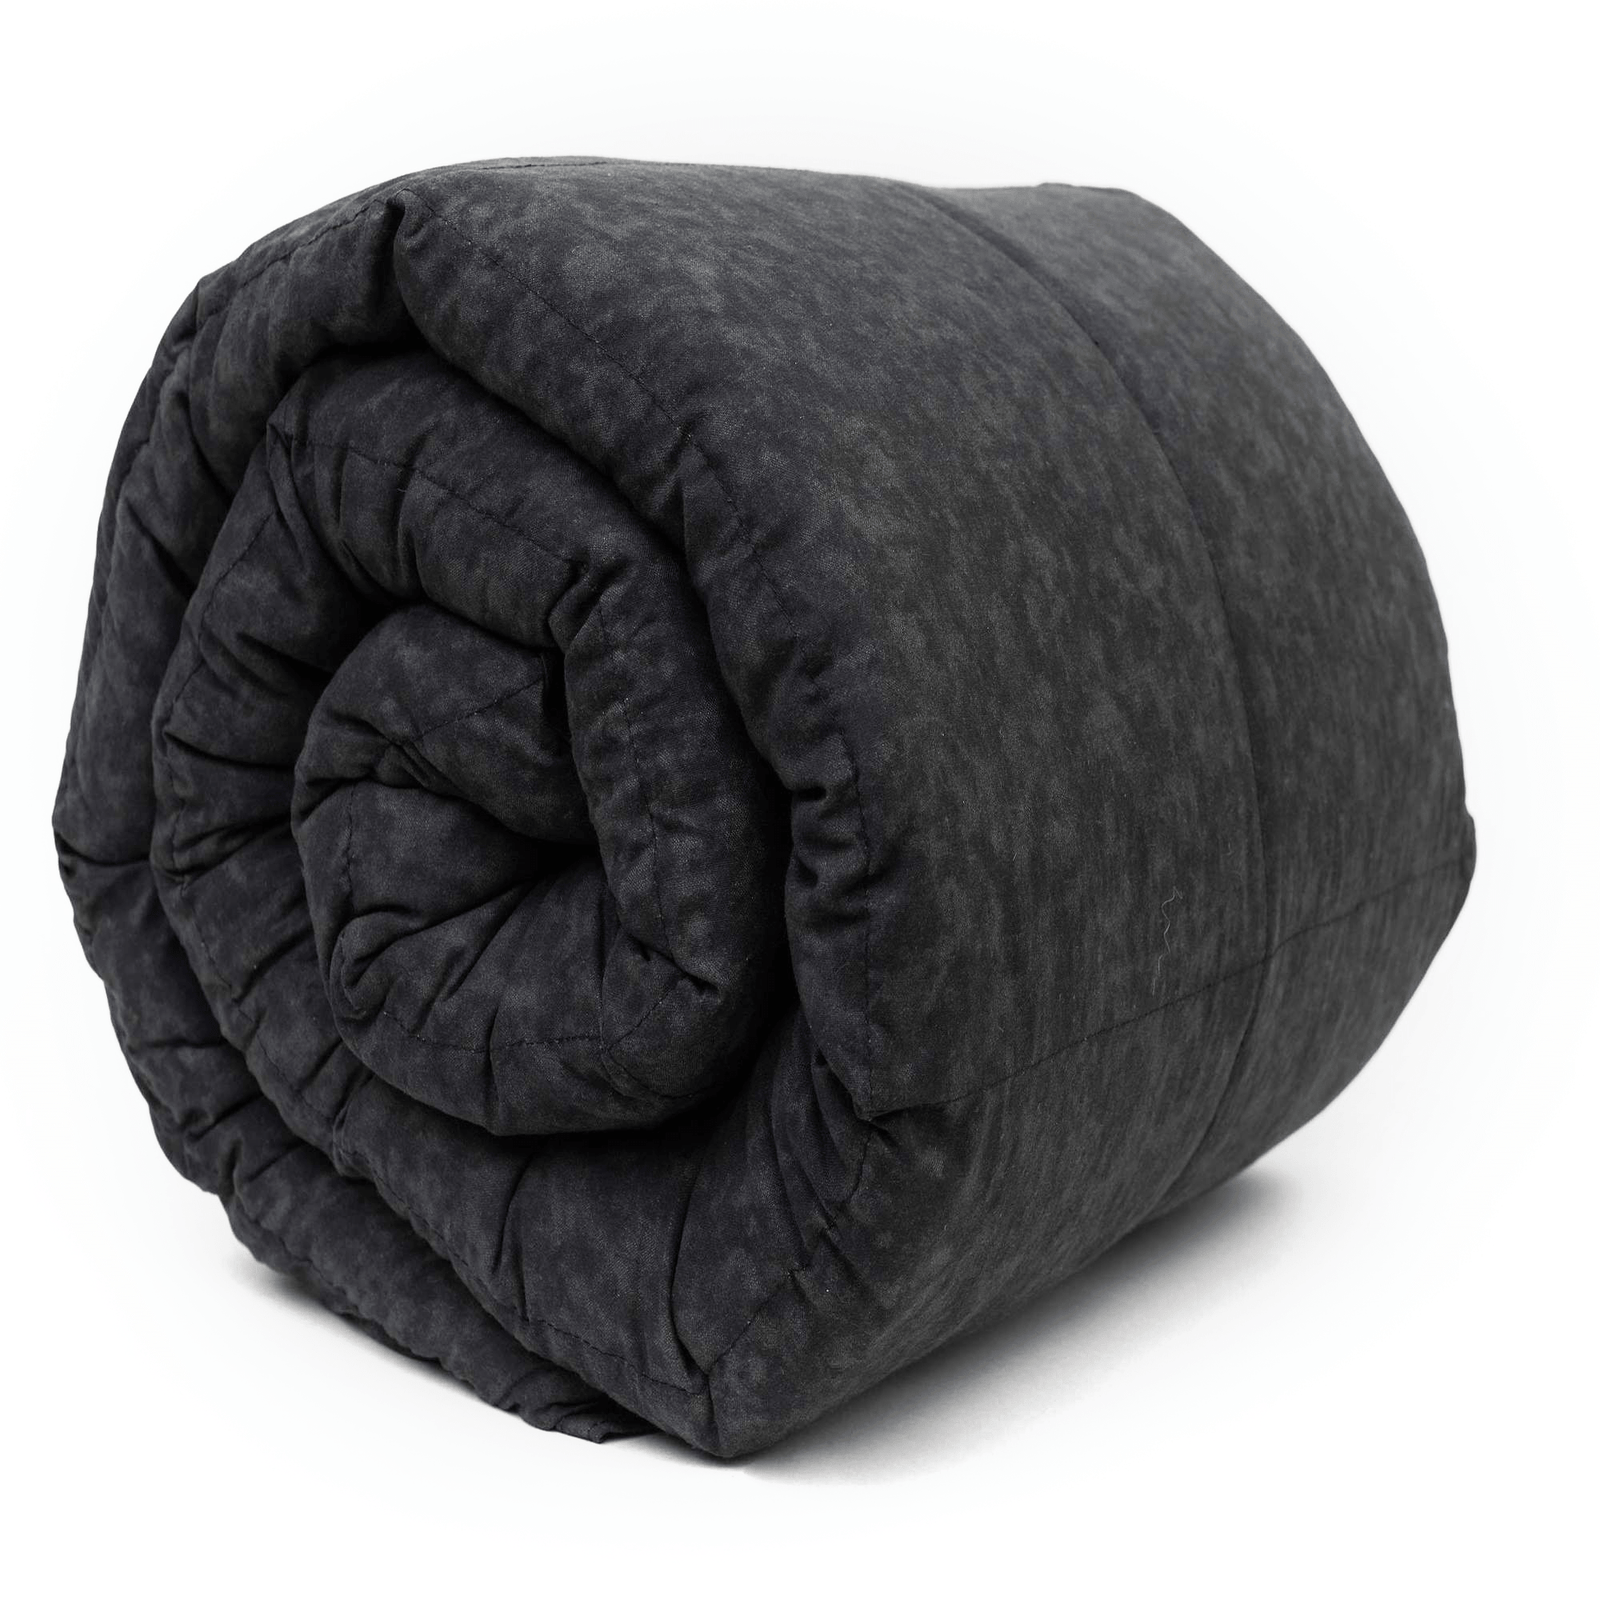 Twin Black Cotton Weighted Blanket Rolled Side View